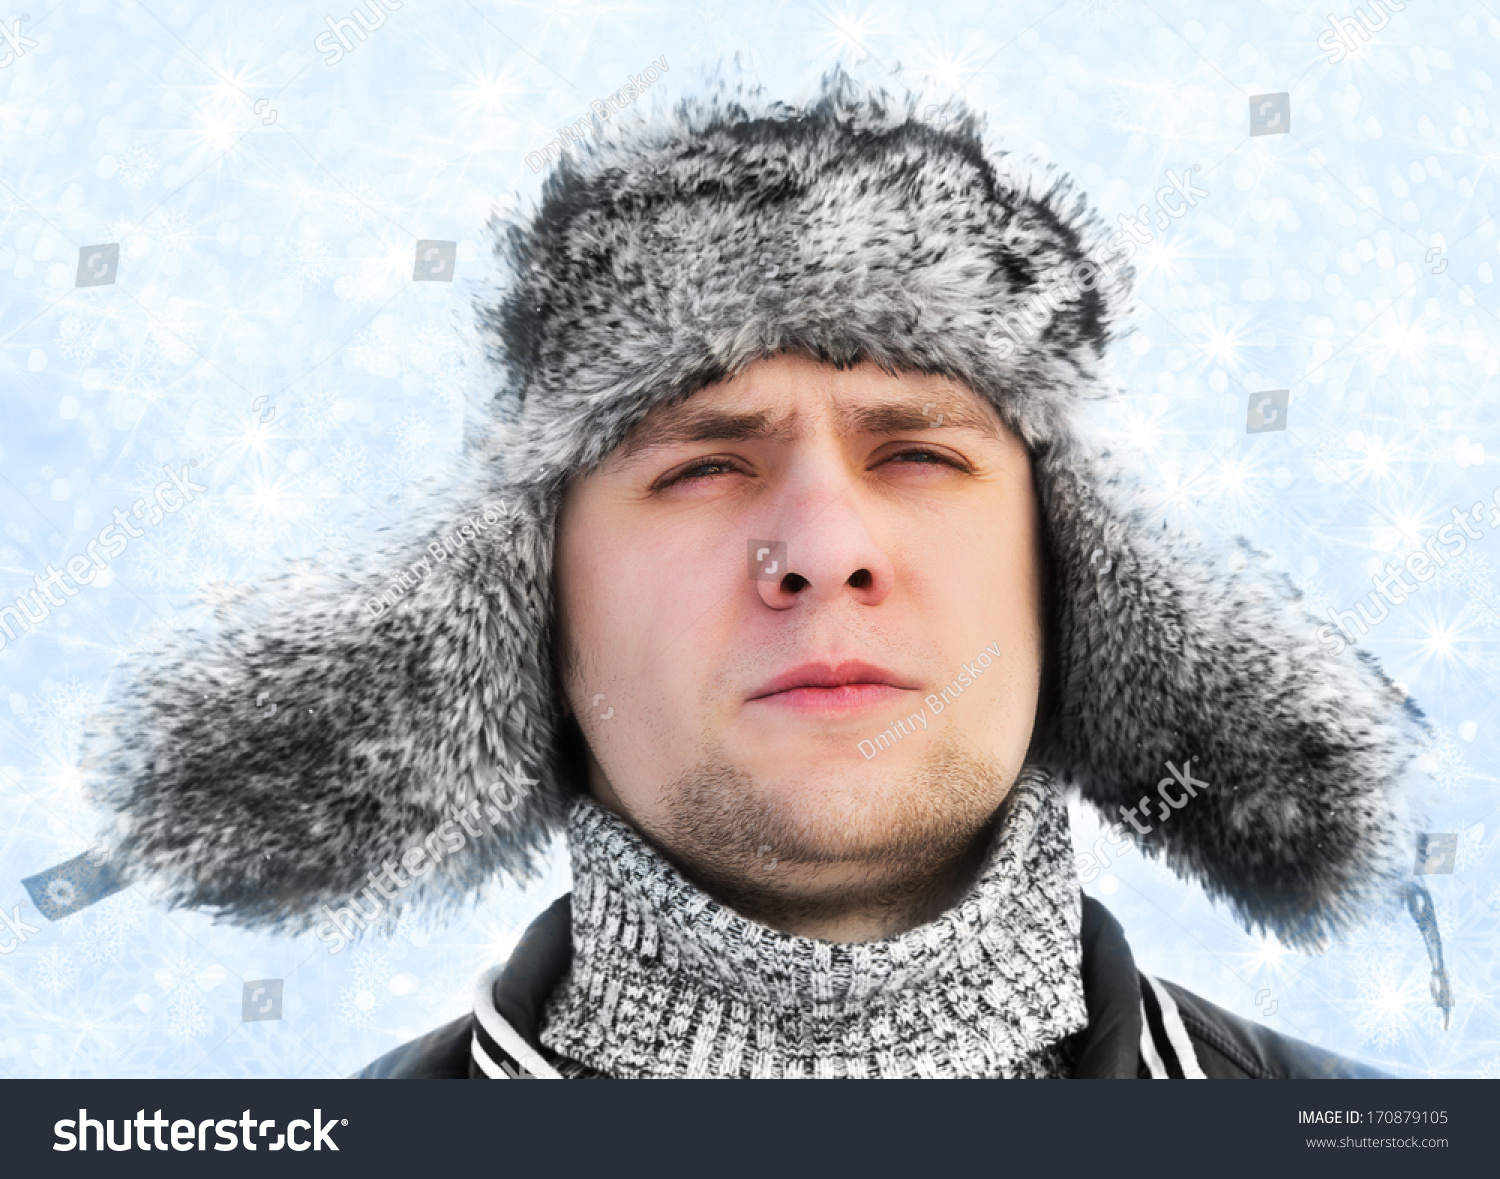 A Man In A Fur Winter Hat With Ear Flaps Stock Photo 170879105 ...